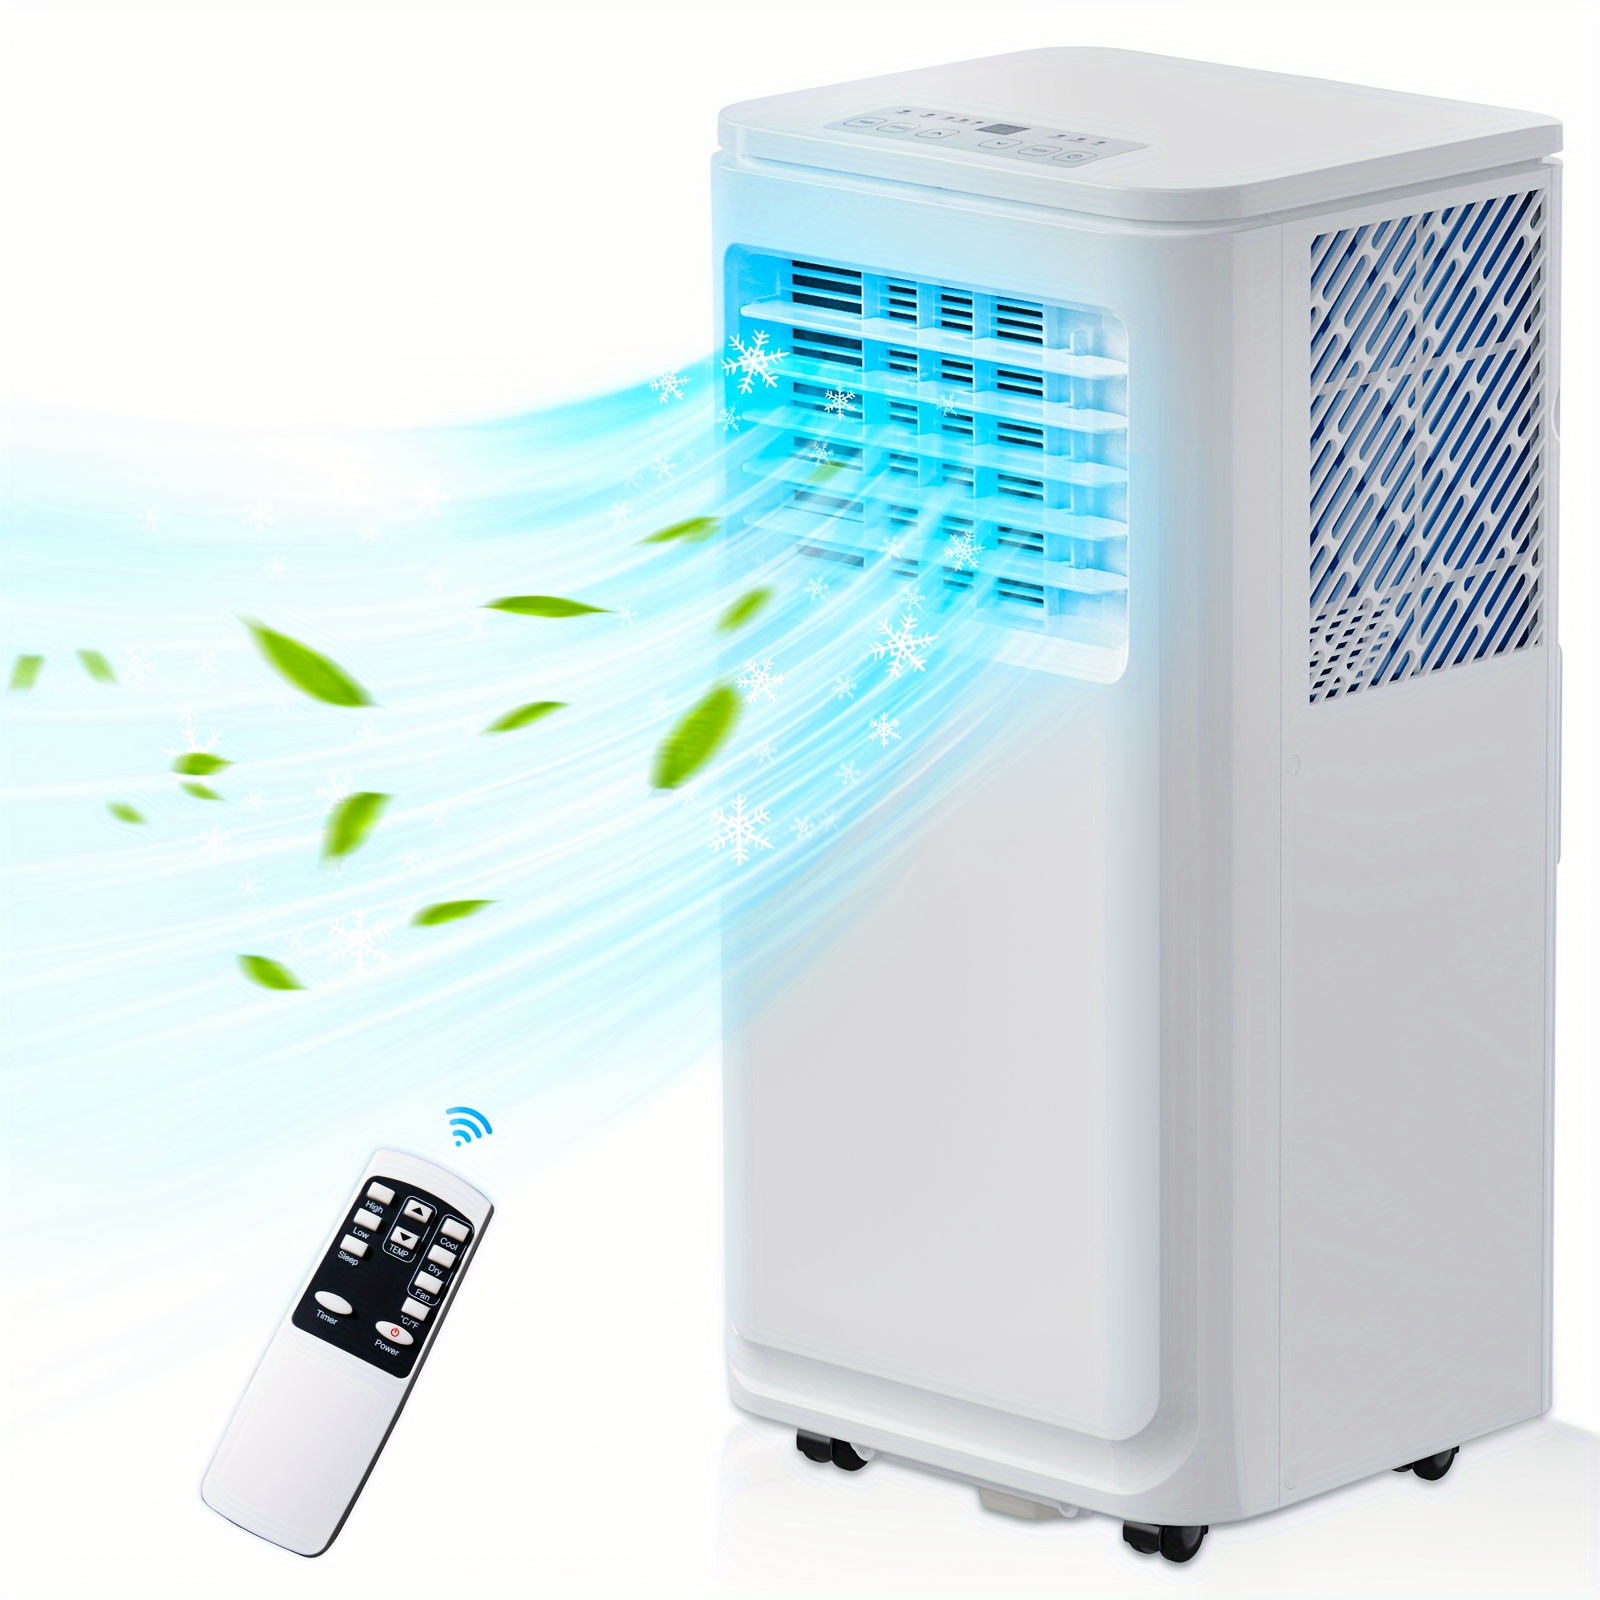 

Portable Air Conditioners, Air Conditioner With Remote For Room Up To 350 Sq Ft, 3-in-1 W/humidifier, Fan Functions & 24h Timer